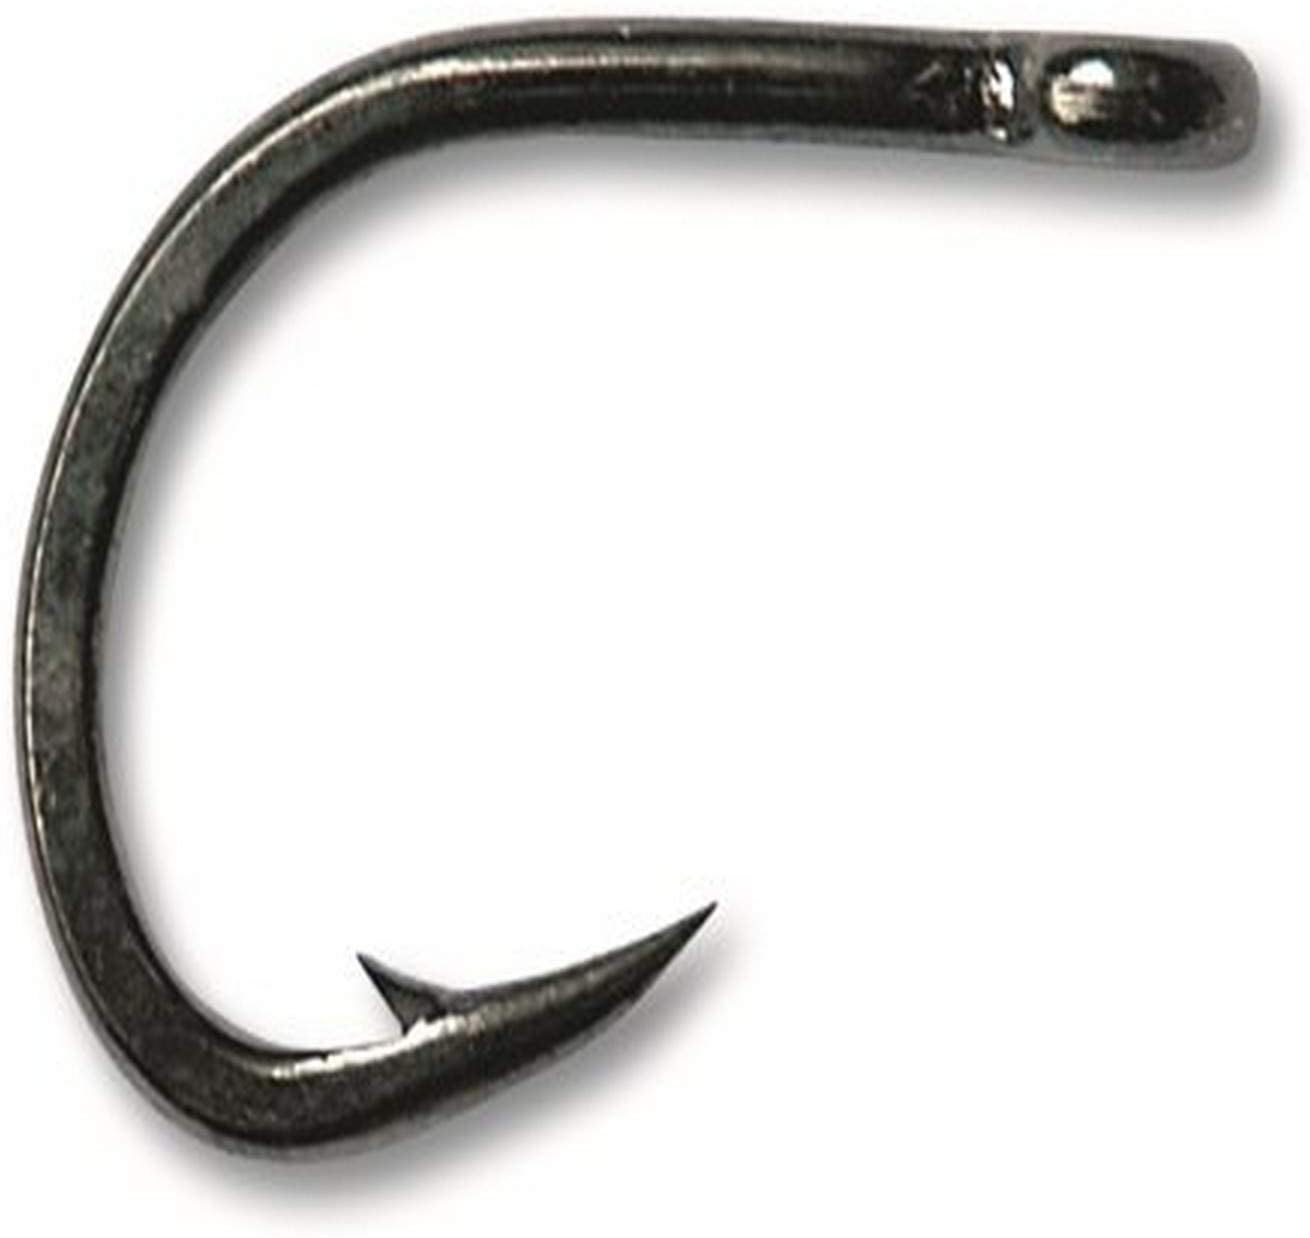 Trout Fishing Hook 1 Pack Of 10 Size # 7 Live Bait Hooks 